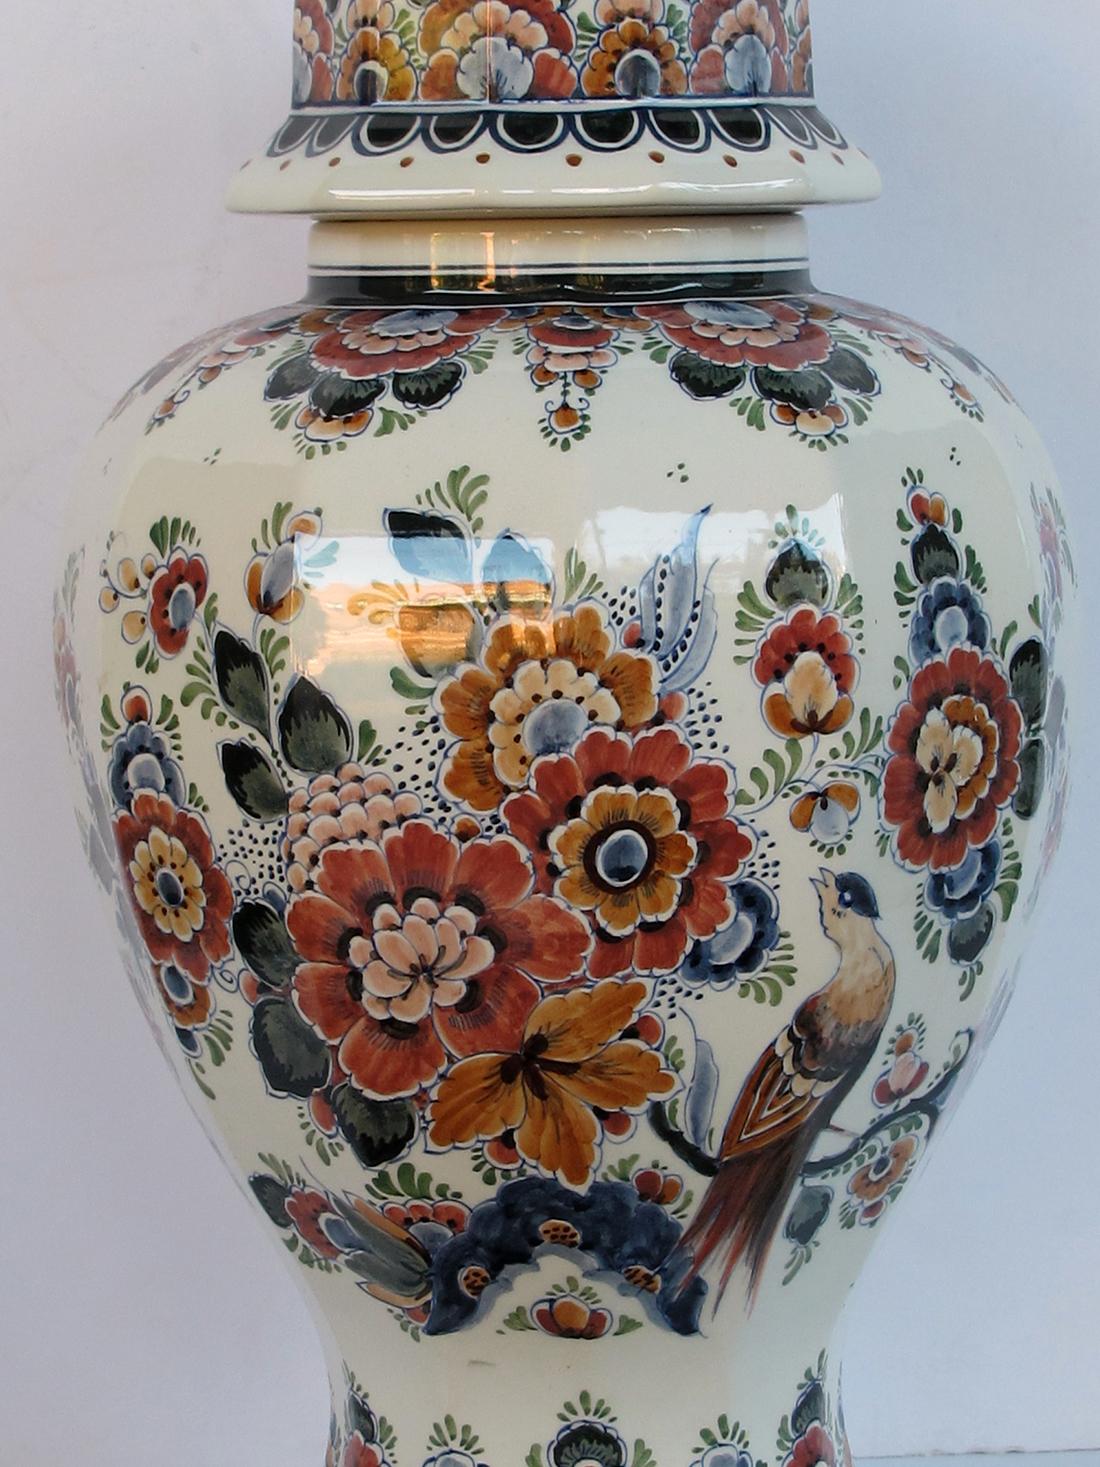 Pair of Delft Hand Painted Covered Jars Signed by the Artist P. Verhoeve 1